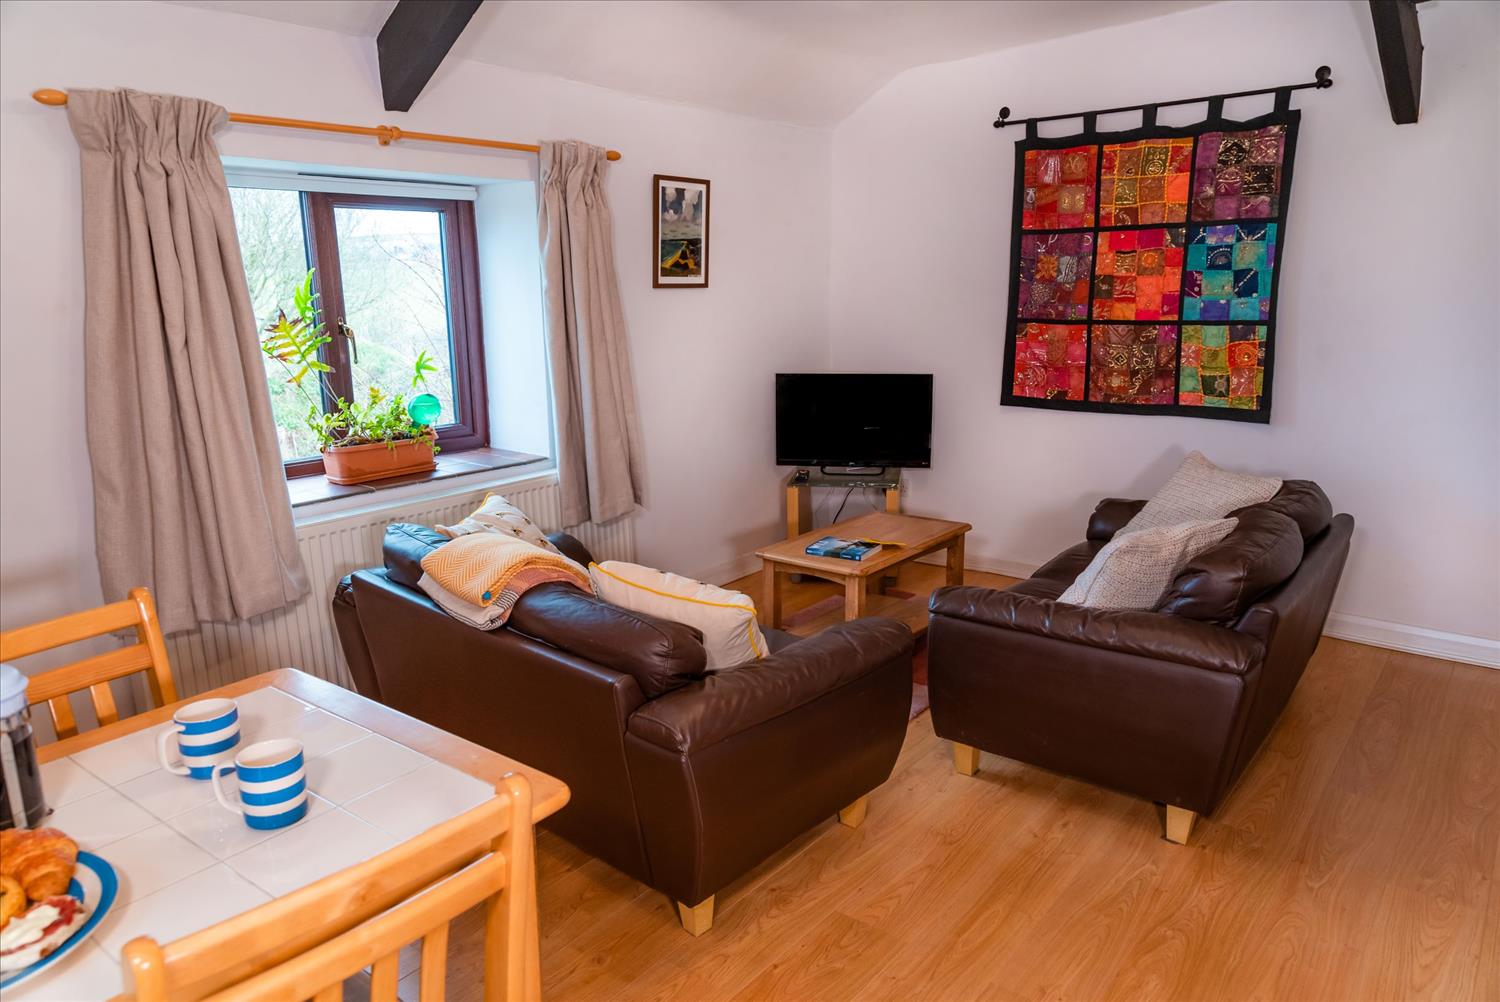 Elderberry Cottage's lounge. As in other properties at Polrunny, a brightly coloured tapestry hangs on the wall above the comfortable brown sofas. 